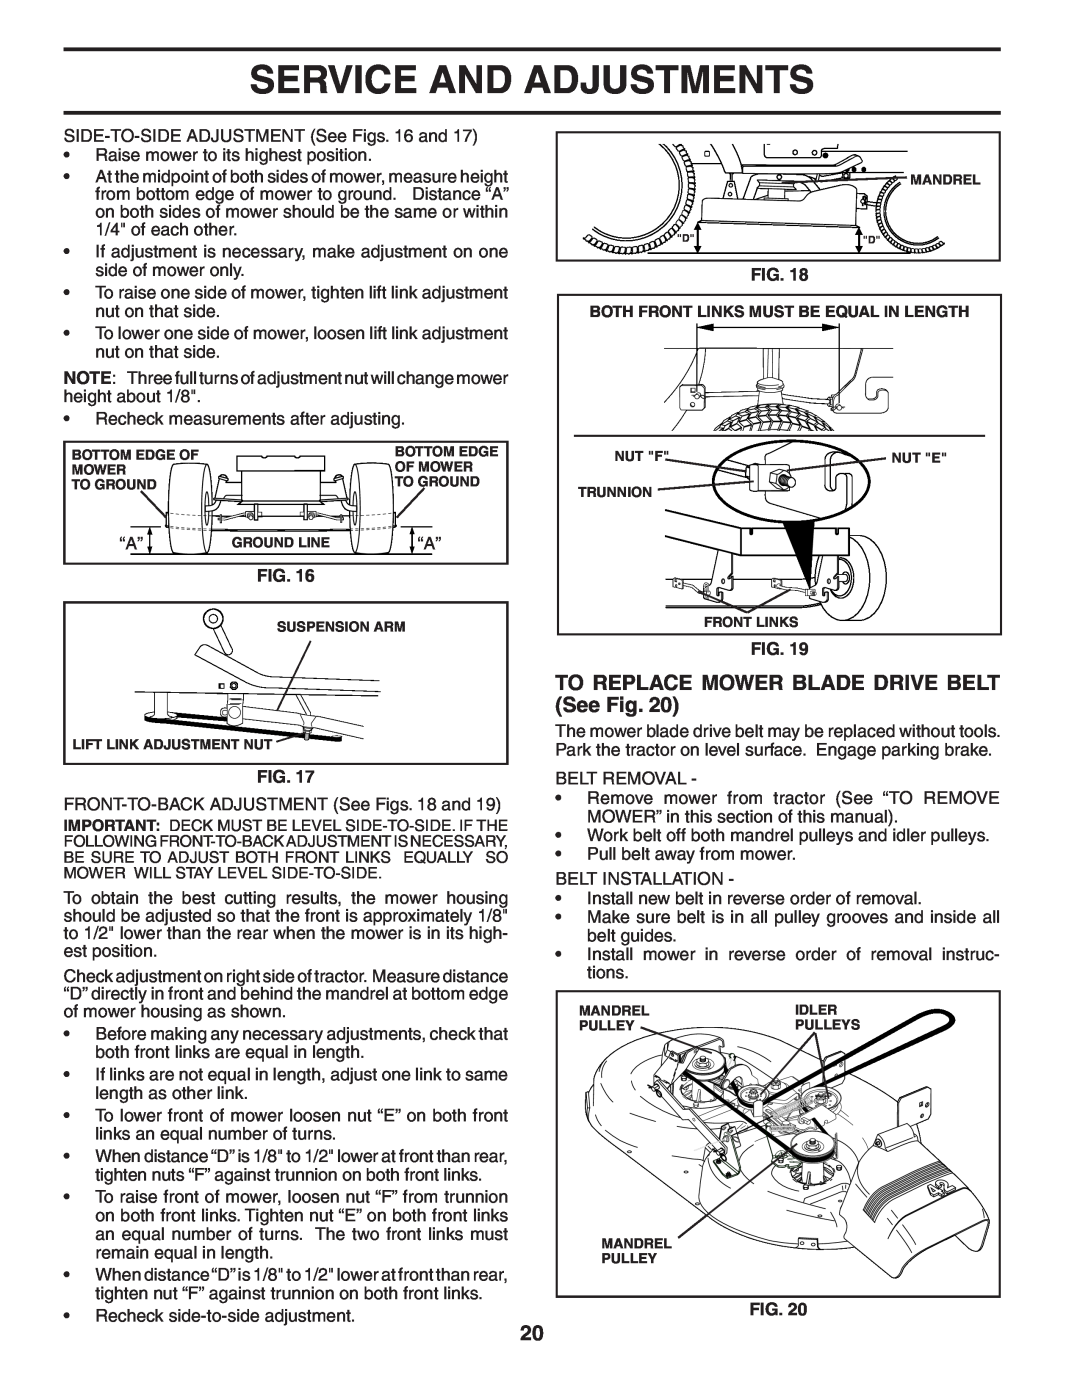 Poulan 405327 manual TO REPLACE MOWER BLADE DRIVE BELT See Fig, Service And Adjustments 